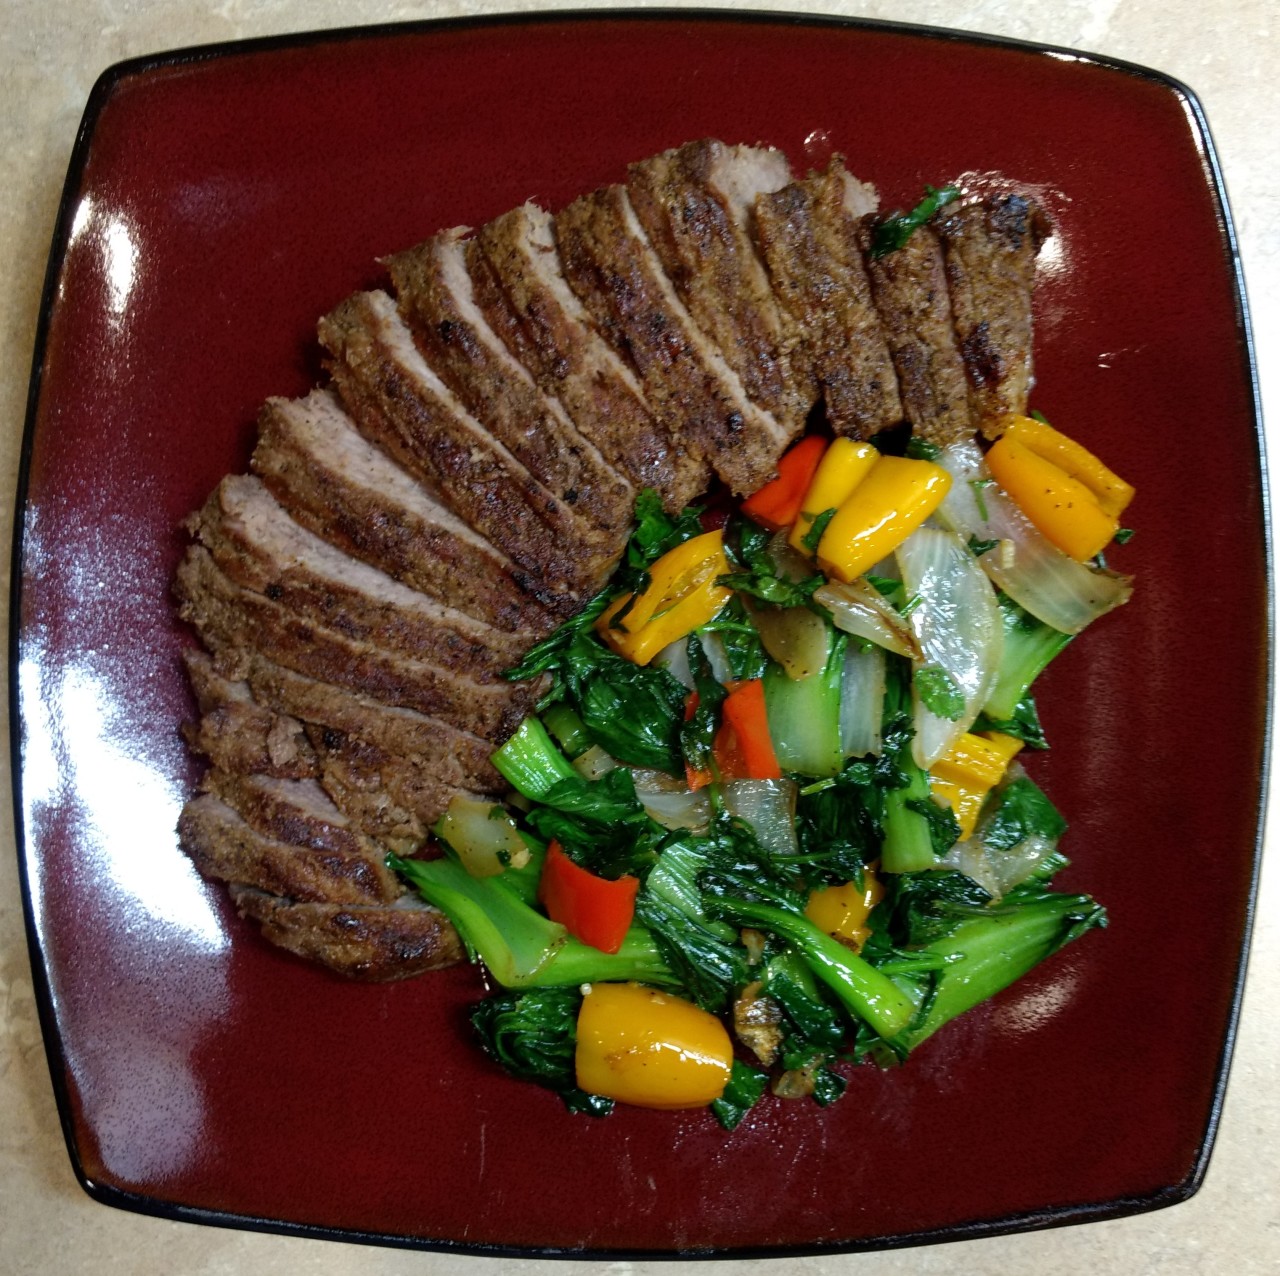 <a class="bx-tag" rel="tag" href="https://streetloc.com/view-channel-profile/whatsfordinner"><s>#</s><b>whatsfordinner</b></a> Grilled Steak and Sauteed Bok Choy, Onion, and Sweet Peppers